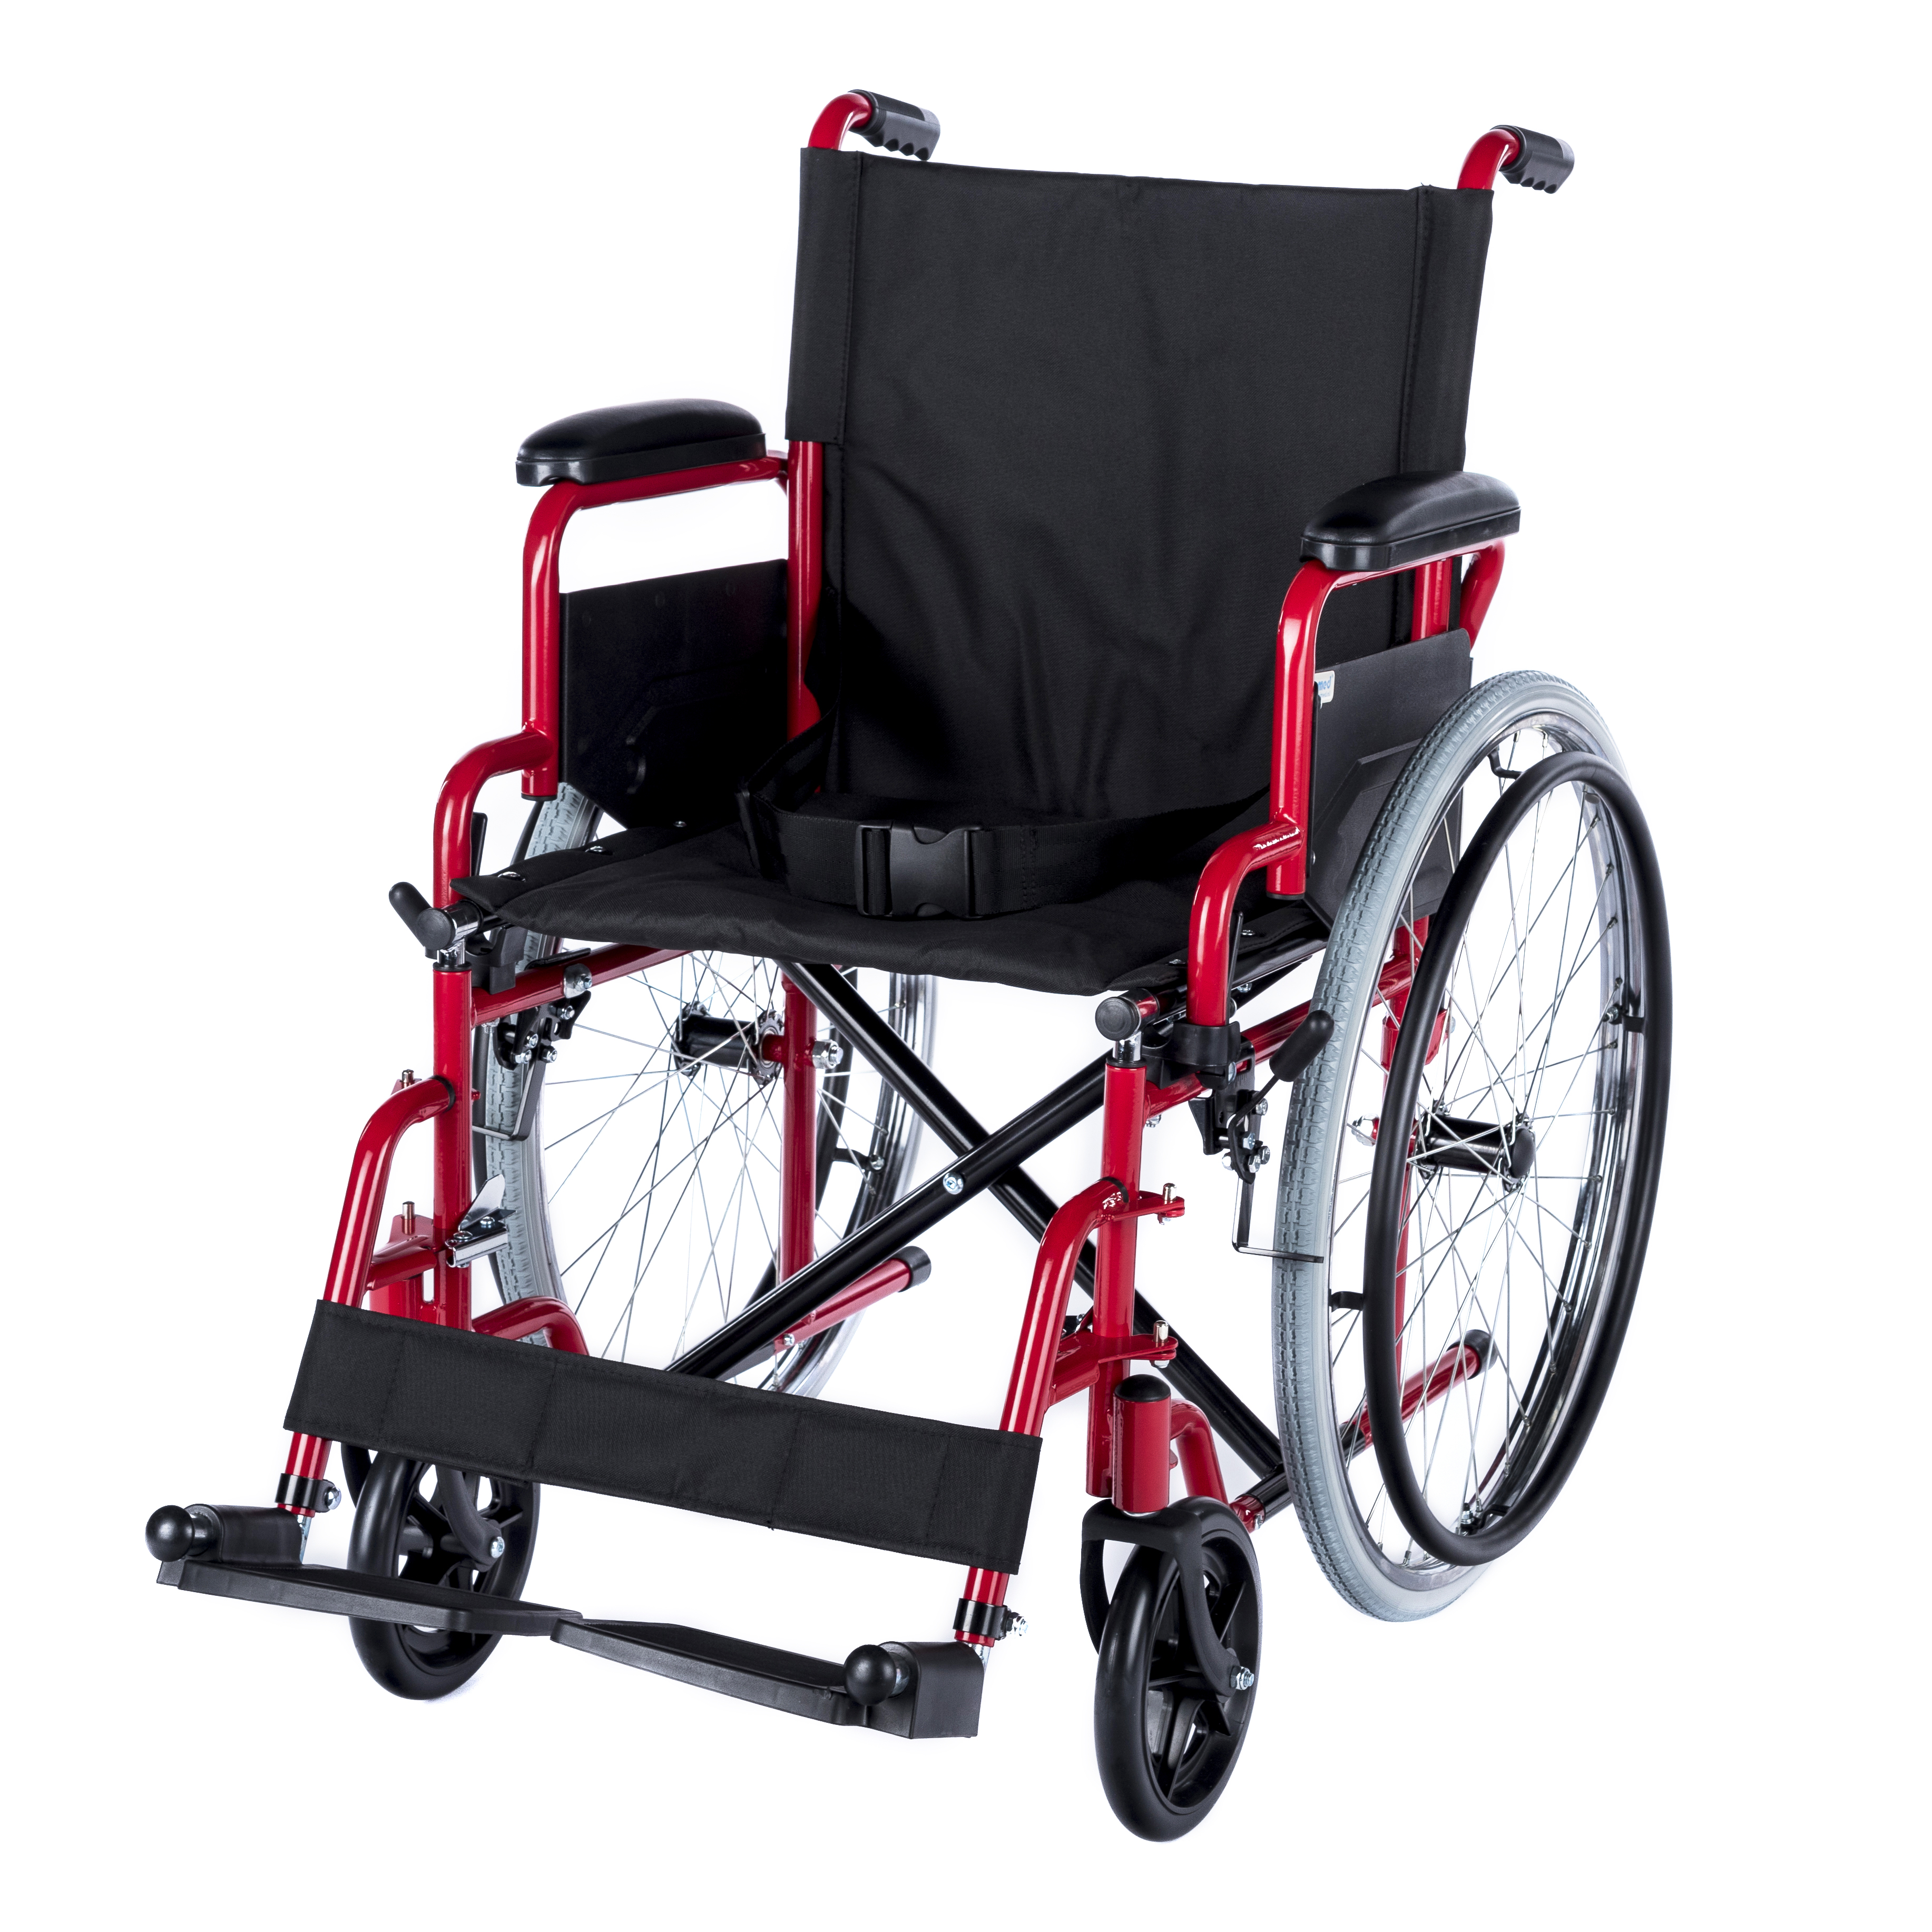 WHE-01-RED Romed foldable manual wheelchair, red,  with flip-up armrest and swing away footrest, per piece in a carton.